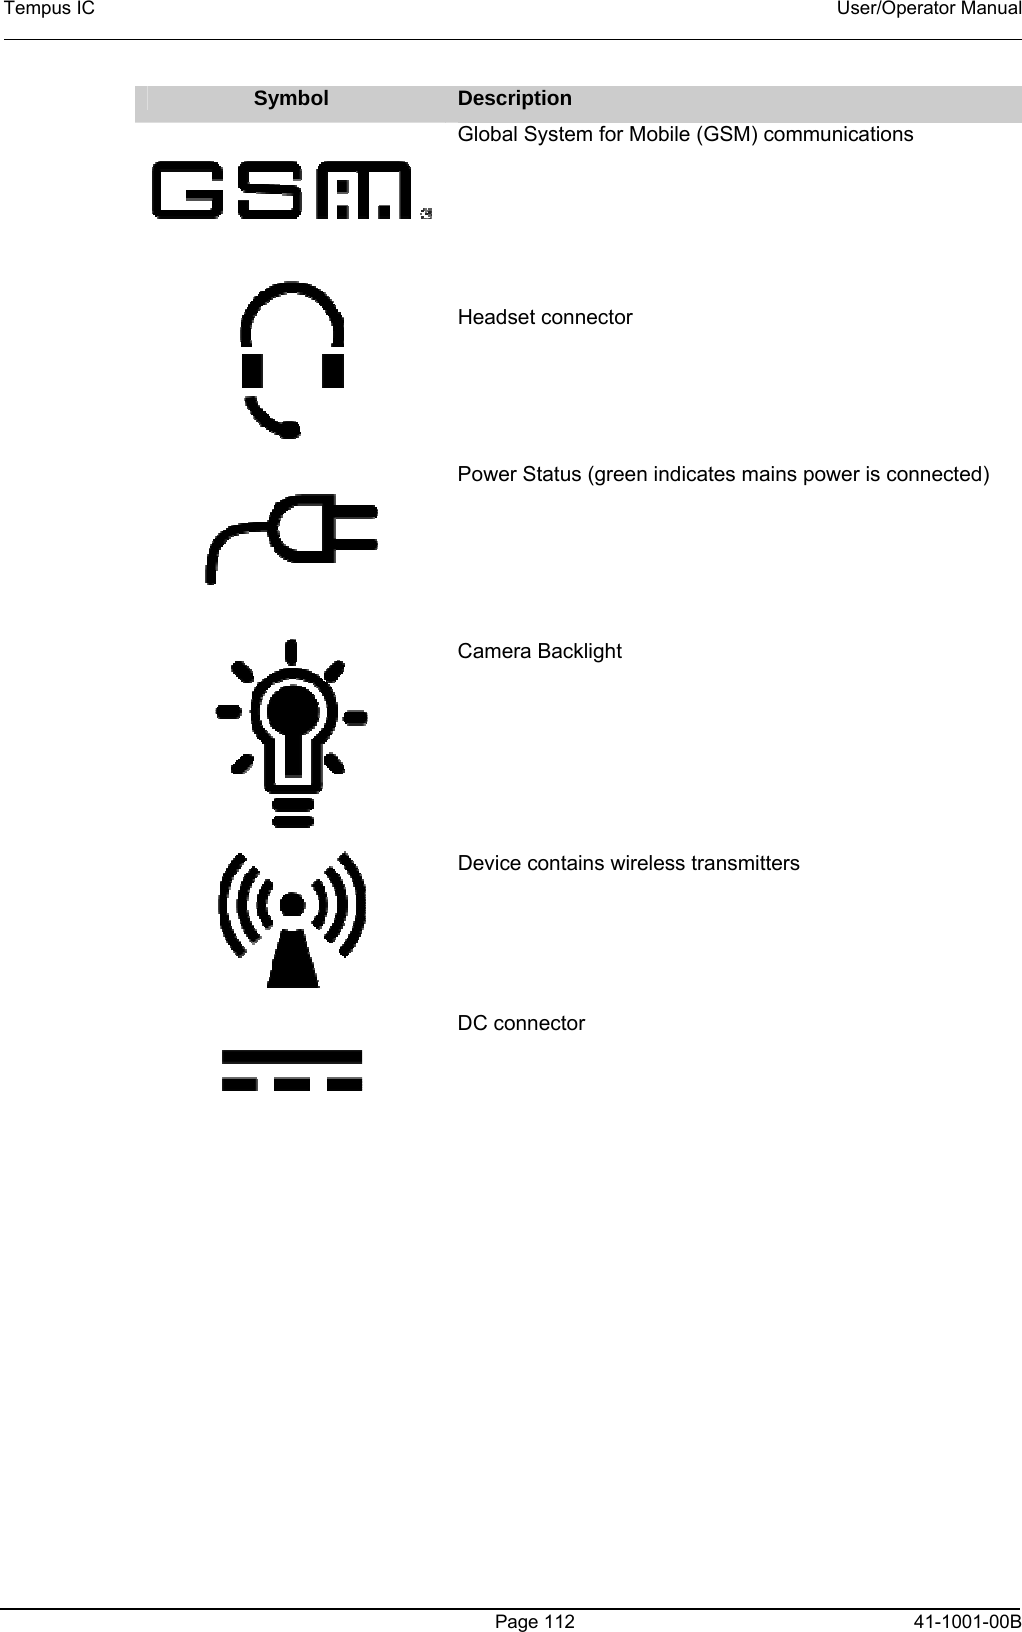 Tempus IC    User/Operator Manual     Page 112  41-1001-00B Symbol  Description  Global System for Mobile (GSM) communications     Headset connector    Power Status (green indicates mains power is connected)    Camera Backlight     Device contains wireless transmitters    DC connector      